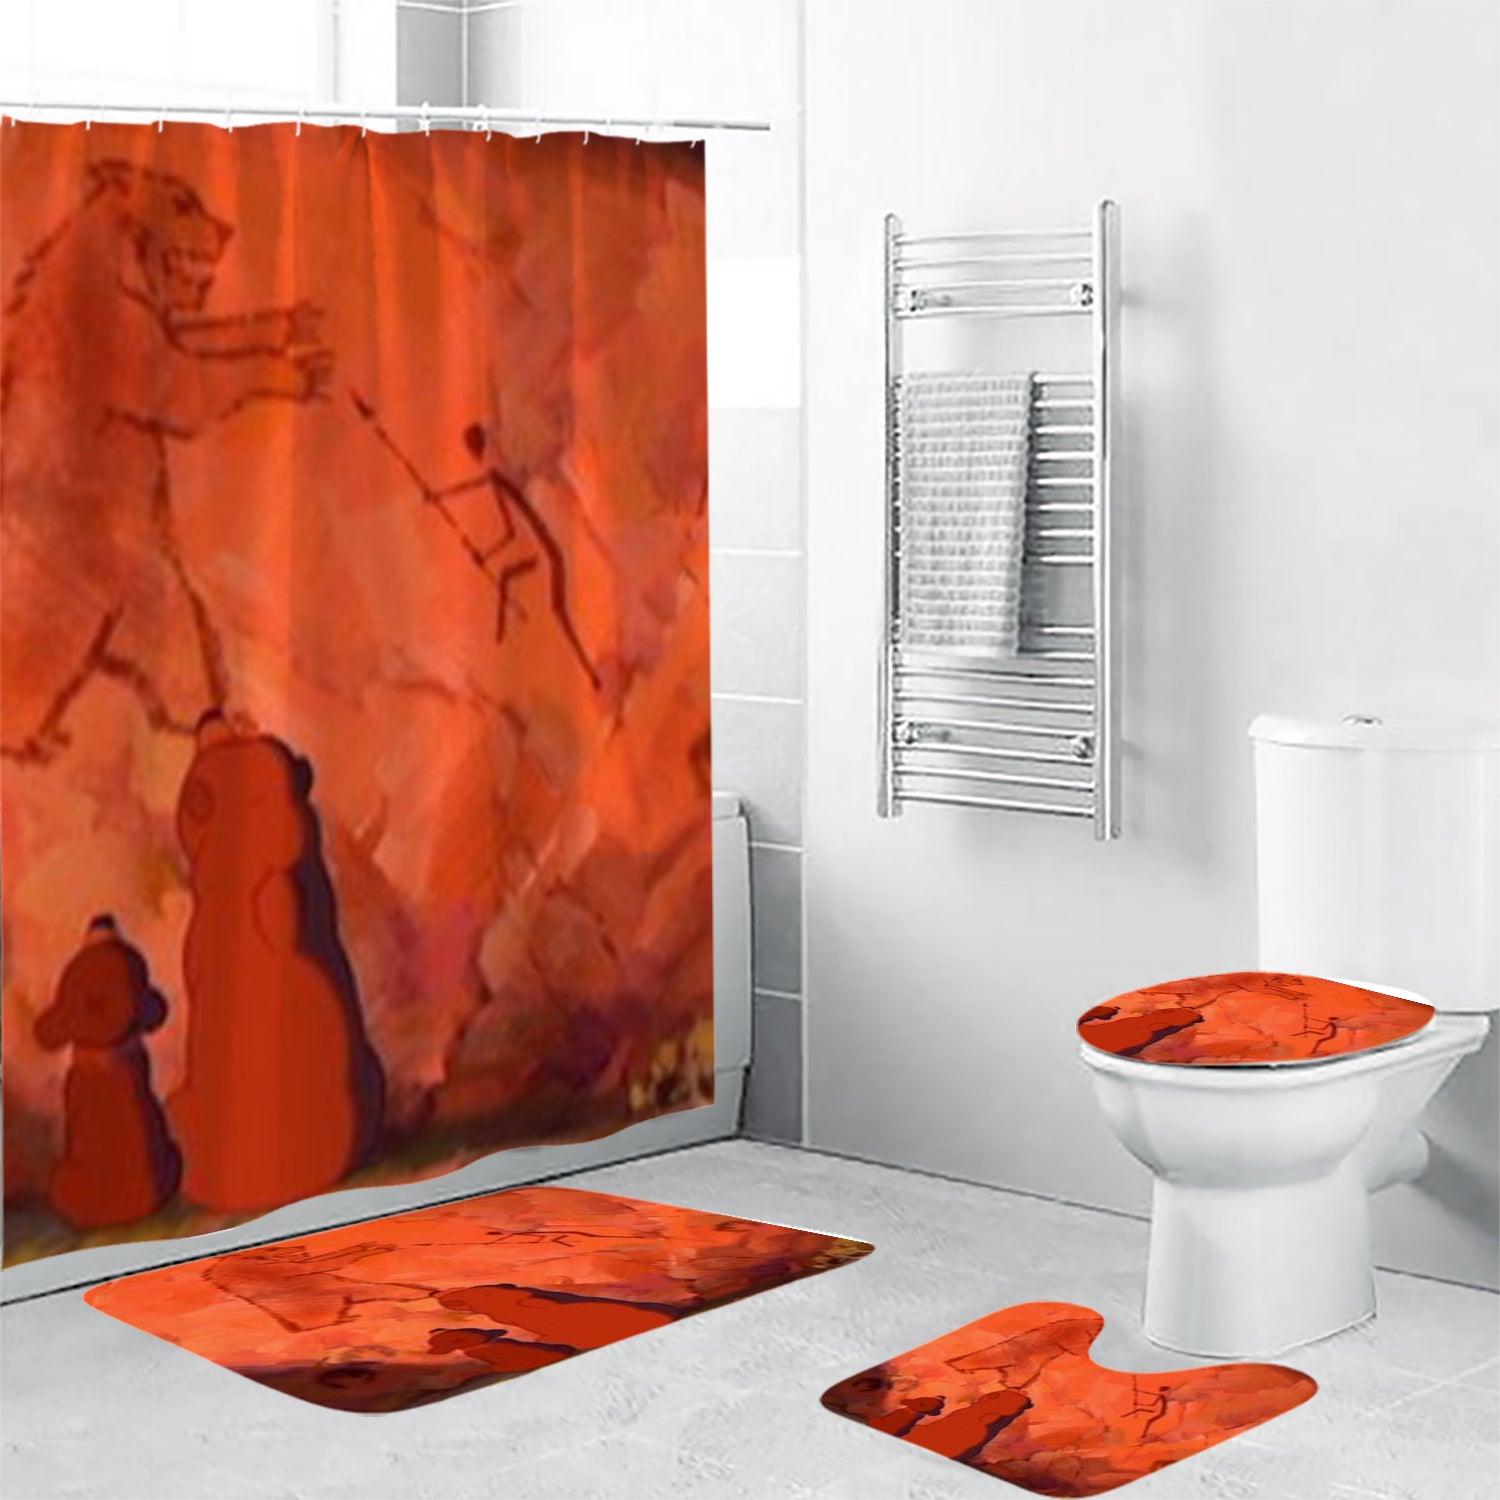 Brother Bear Poster 10 4PCS Shower Curtain Non-Slip Toilet Lid Cover Bath Mat - Bathroom Set Fans Gifts